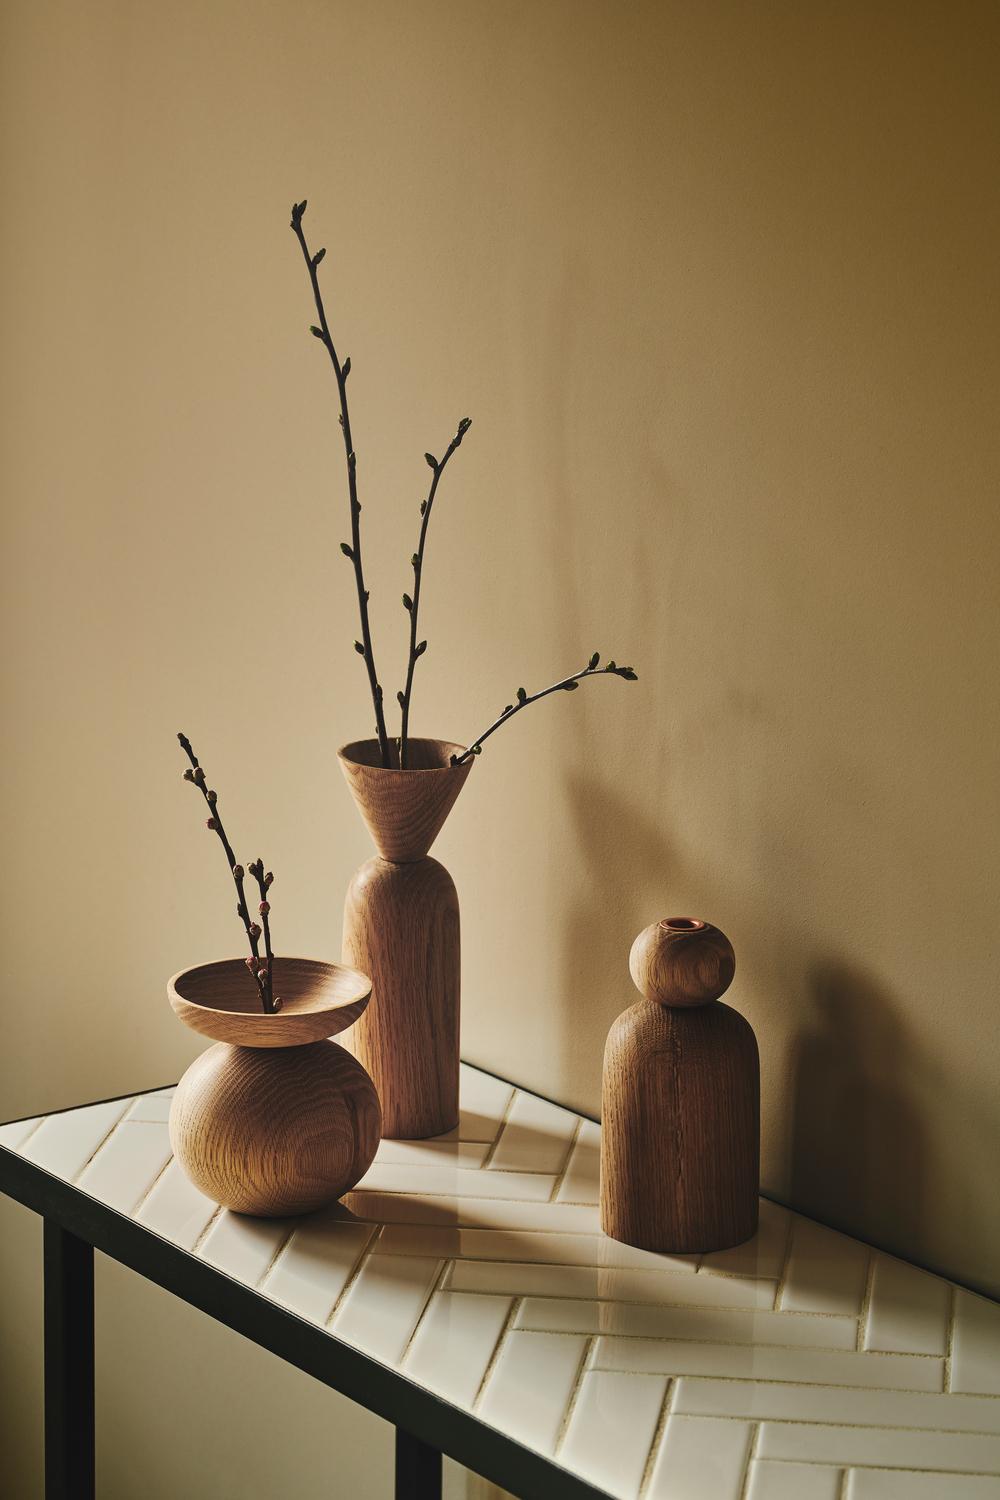 Cone Shape Smoked Oak Vase by Applicata
Dimensions: D 9 x W 9 x H 25 cm
Materials: Smoked oak.

Available in Ball, Cone, and Bowl shape.
Available in oak, smoked oak, and black stained oak.

The Shape vase collection is a series of sensuous objects